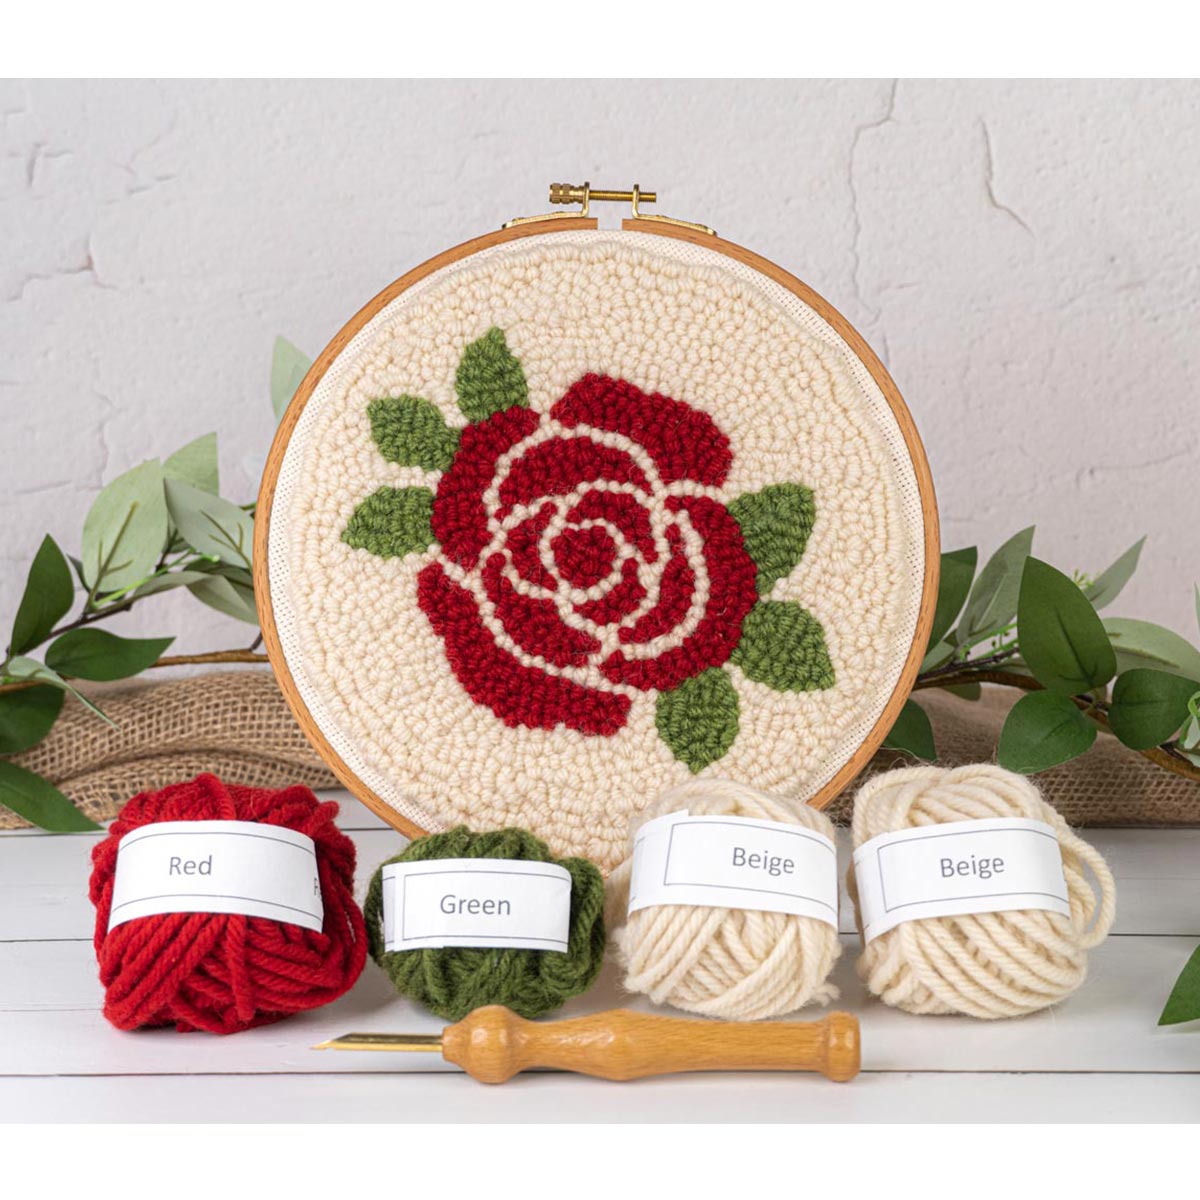 Rose Mini Punch Needle Kit - Includes Punch Needle Tool, 100% Wool Yarn, 8 inch Beech Wood Hoop, and More